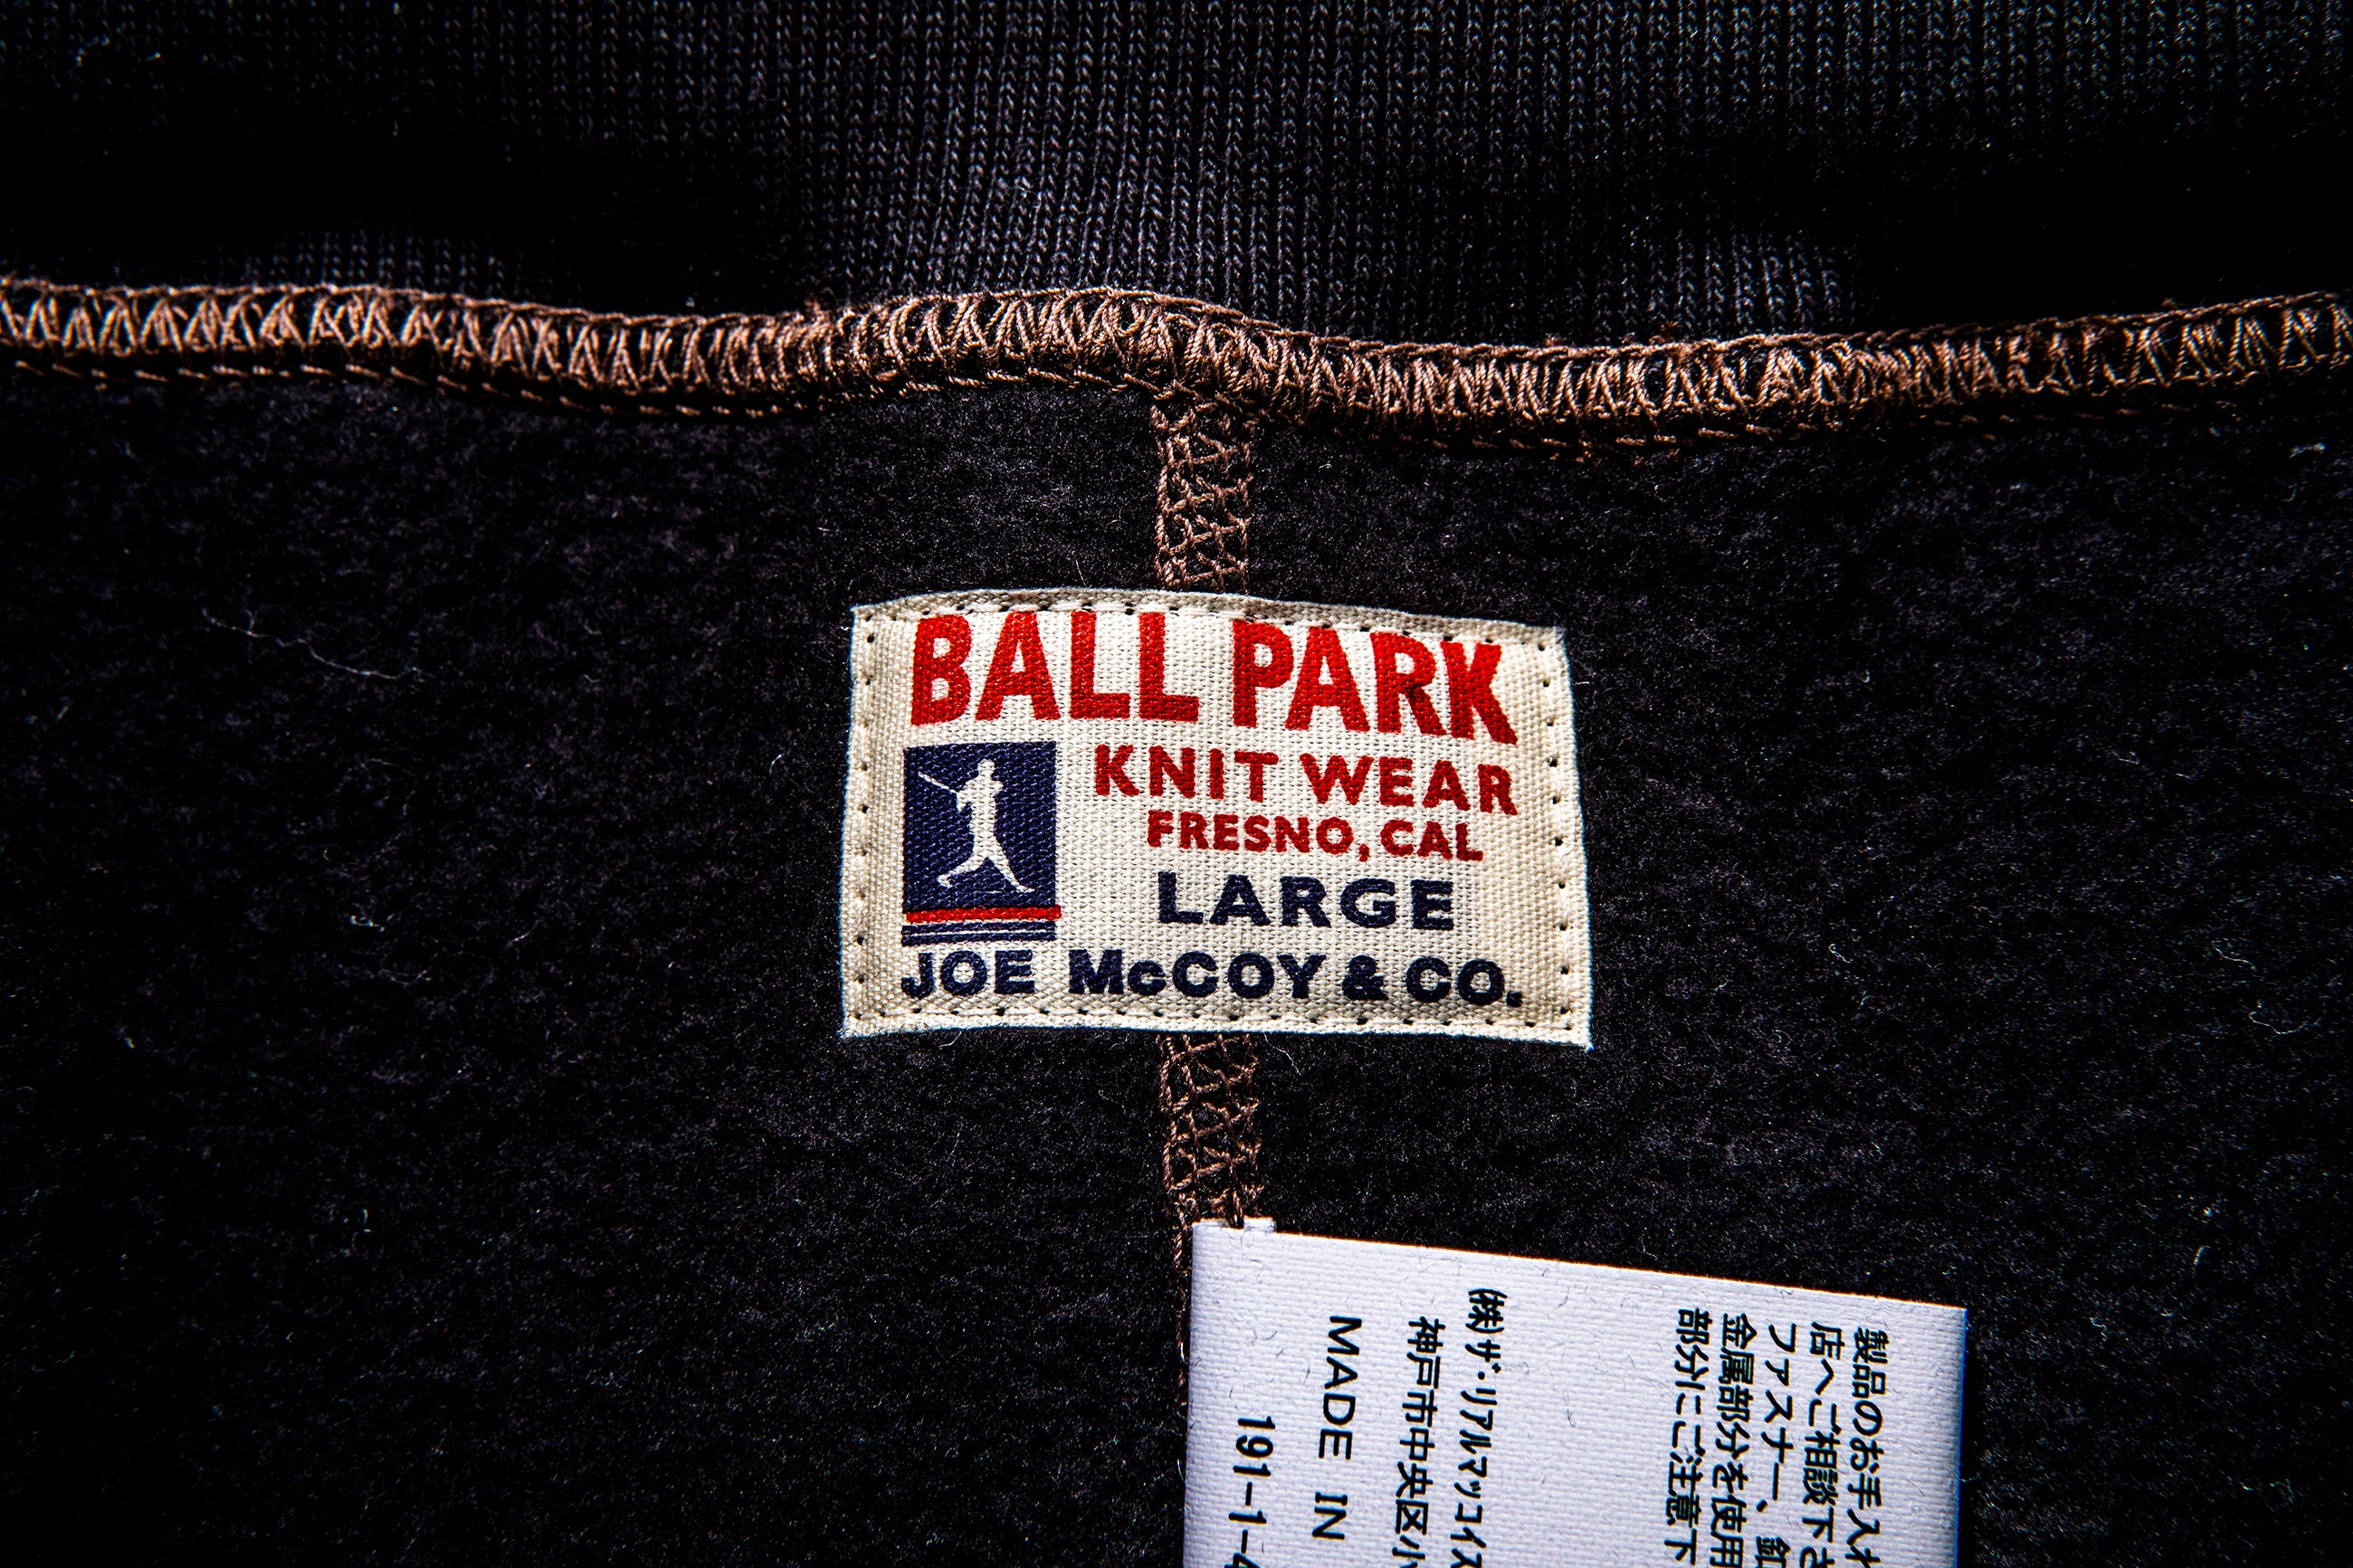 BALL PARK SWEATPANTS – The Real McCoy's